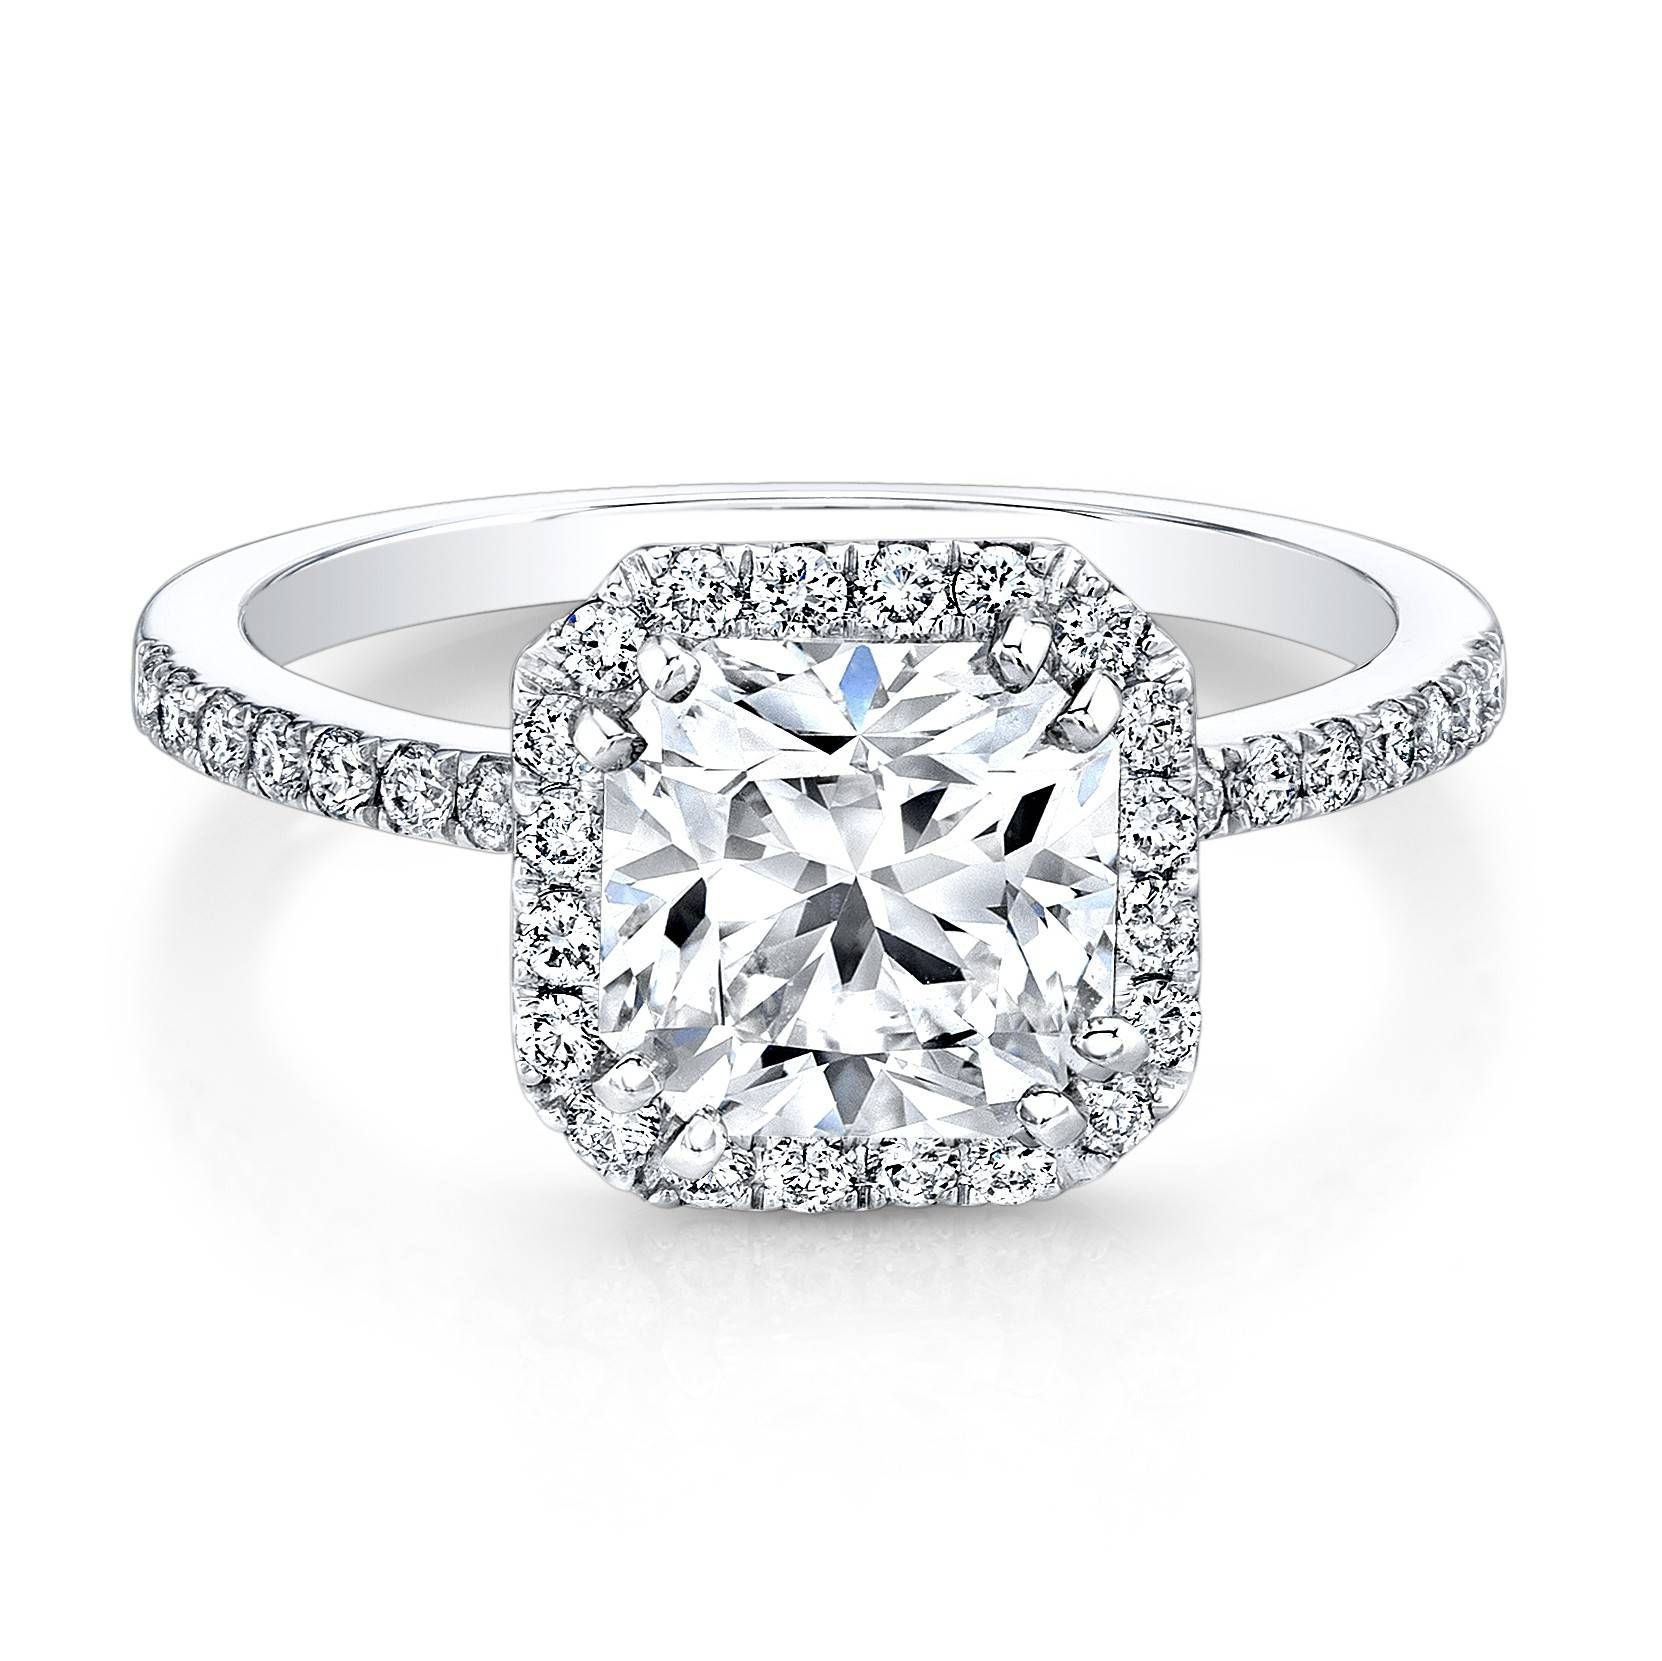 White Gold Square Halo Bezel Set Diamond Accent Engagement Ring Intended For Halo Style Diamond Engagement Rings (View 4 of 15)